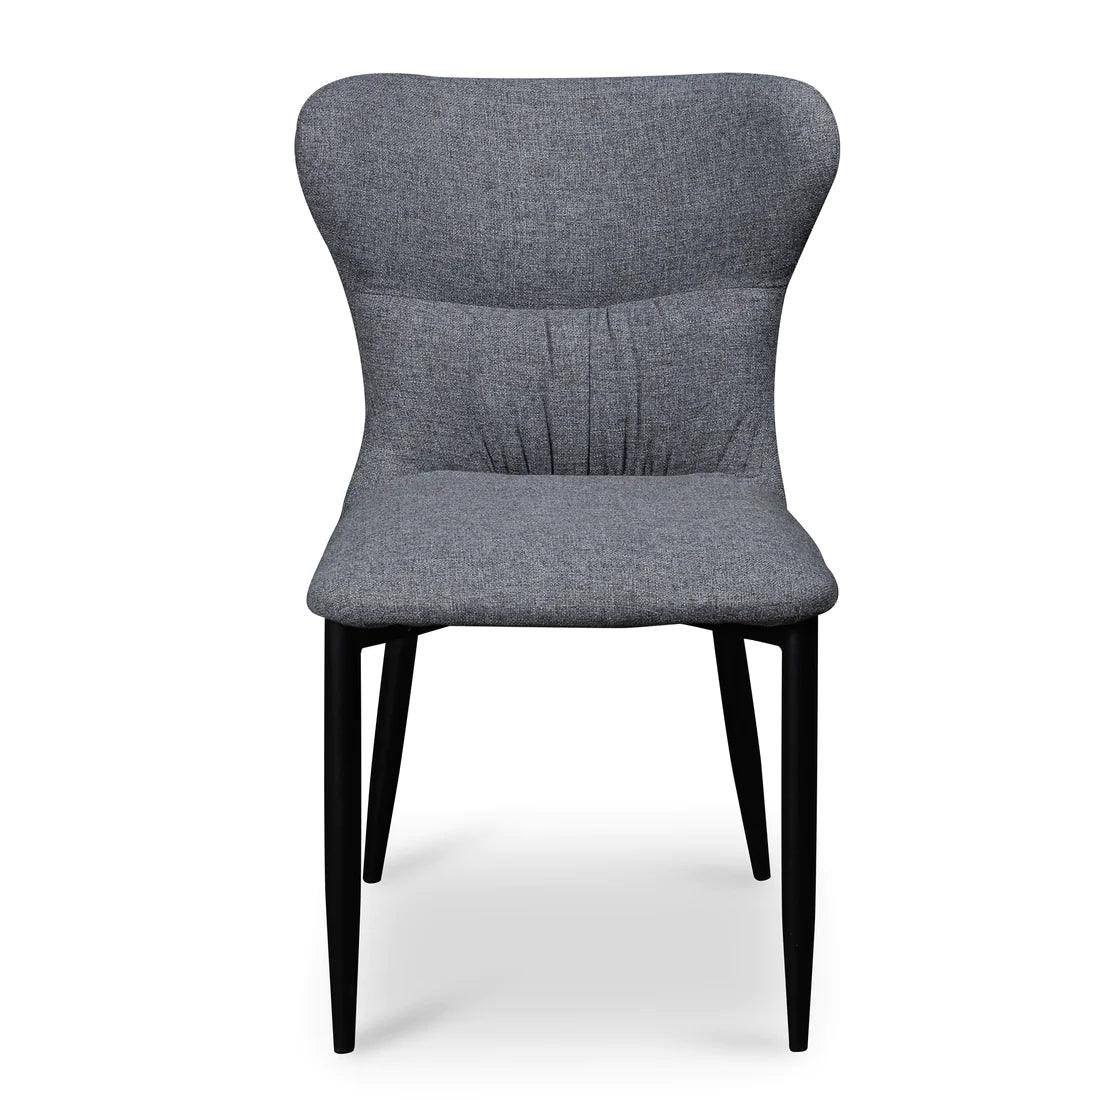 Dank Fabric Dining Chair - Pebble Grey with Black Legs Set of 4 - Furniture Castle